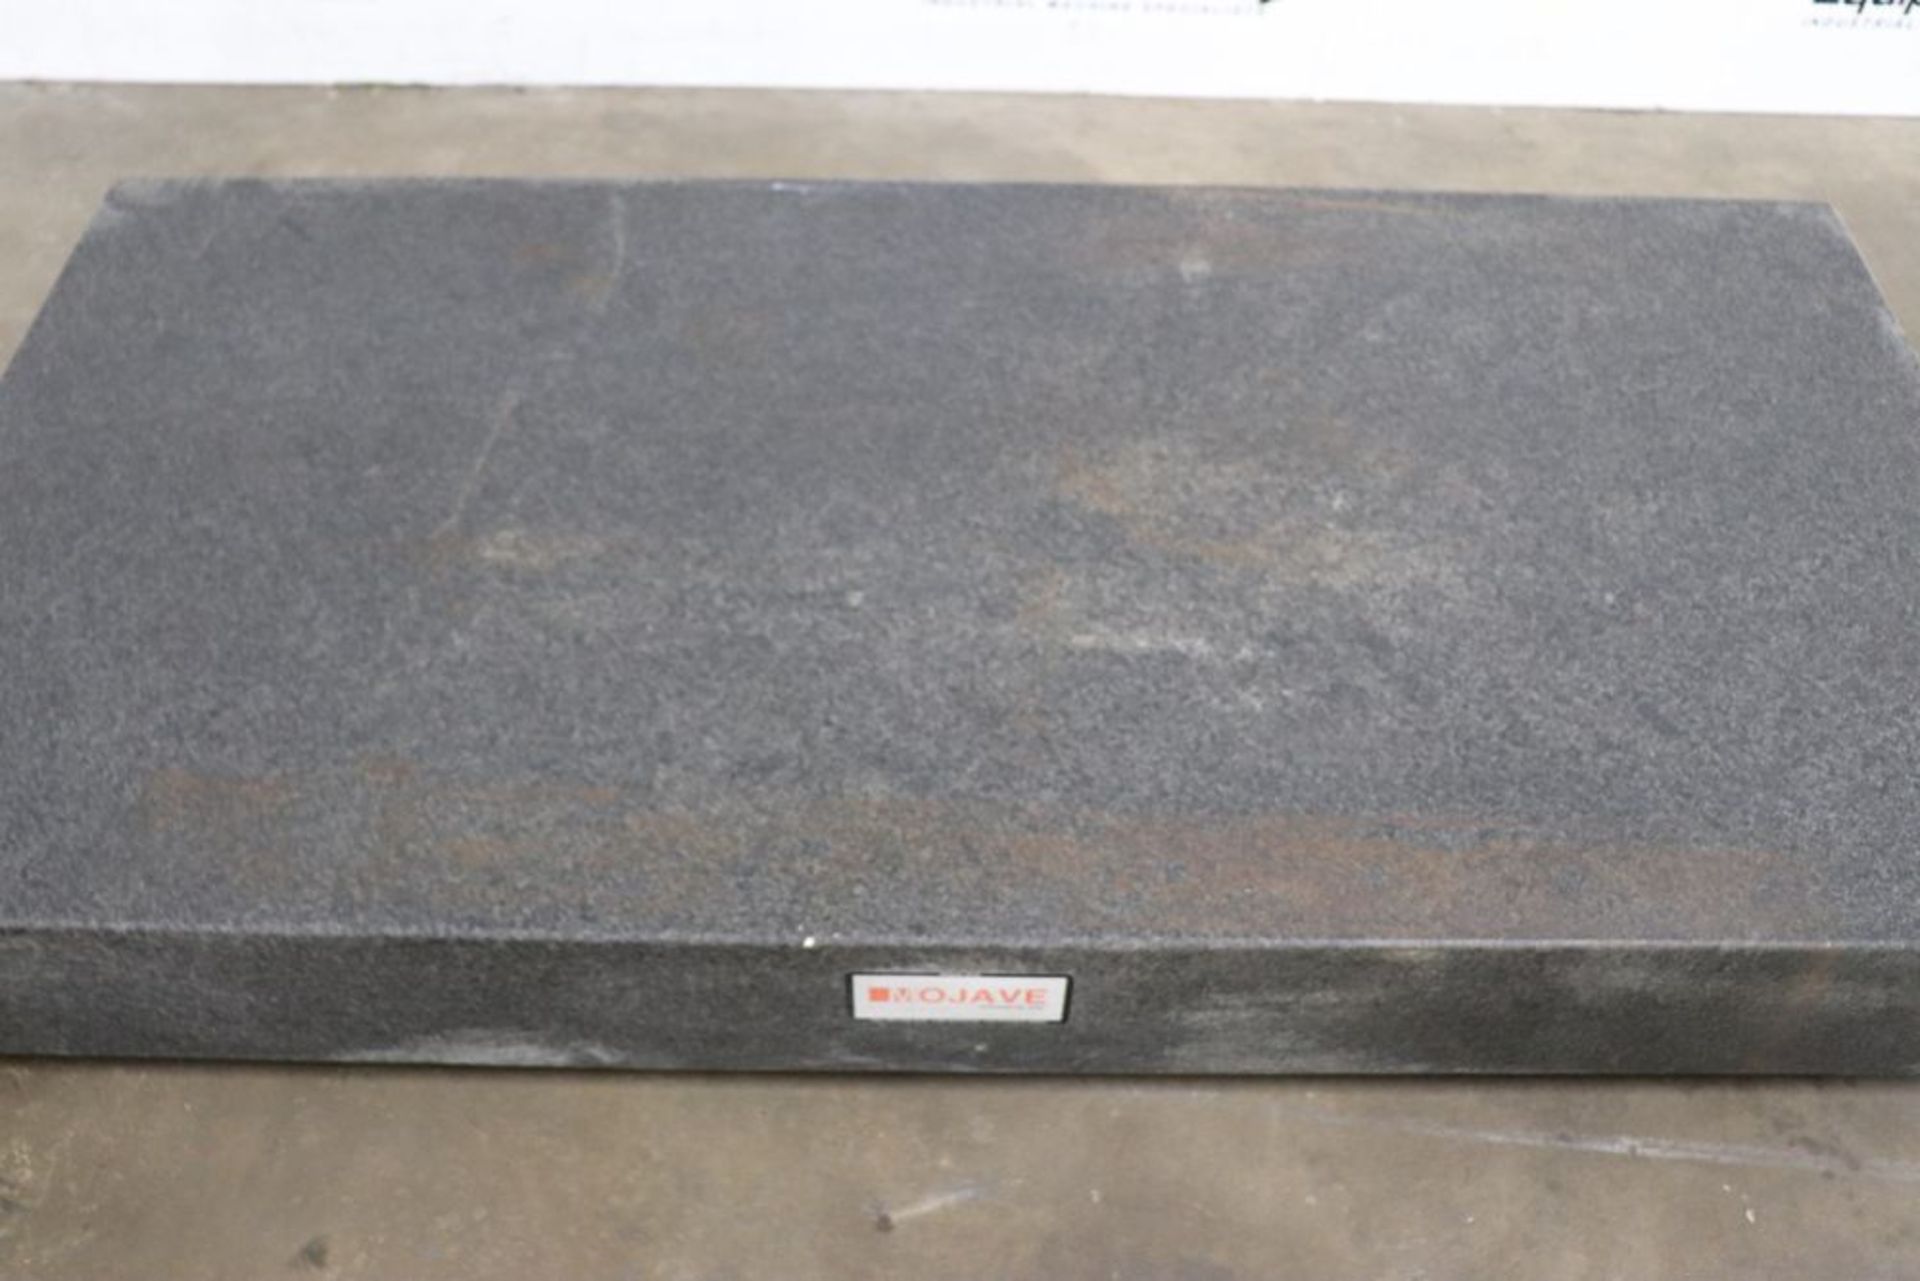 Mojave 72″ x 36″ x 8″ Granite Surface Inspection Plate - Image 4 of 5